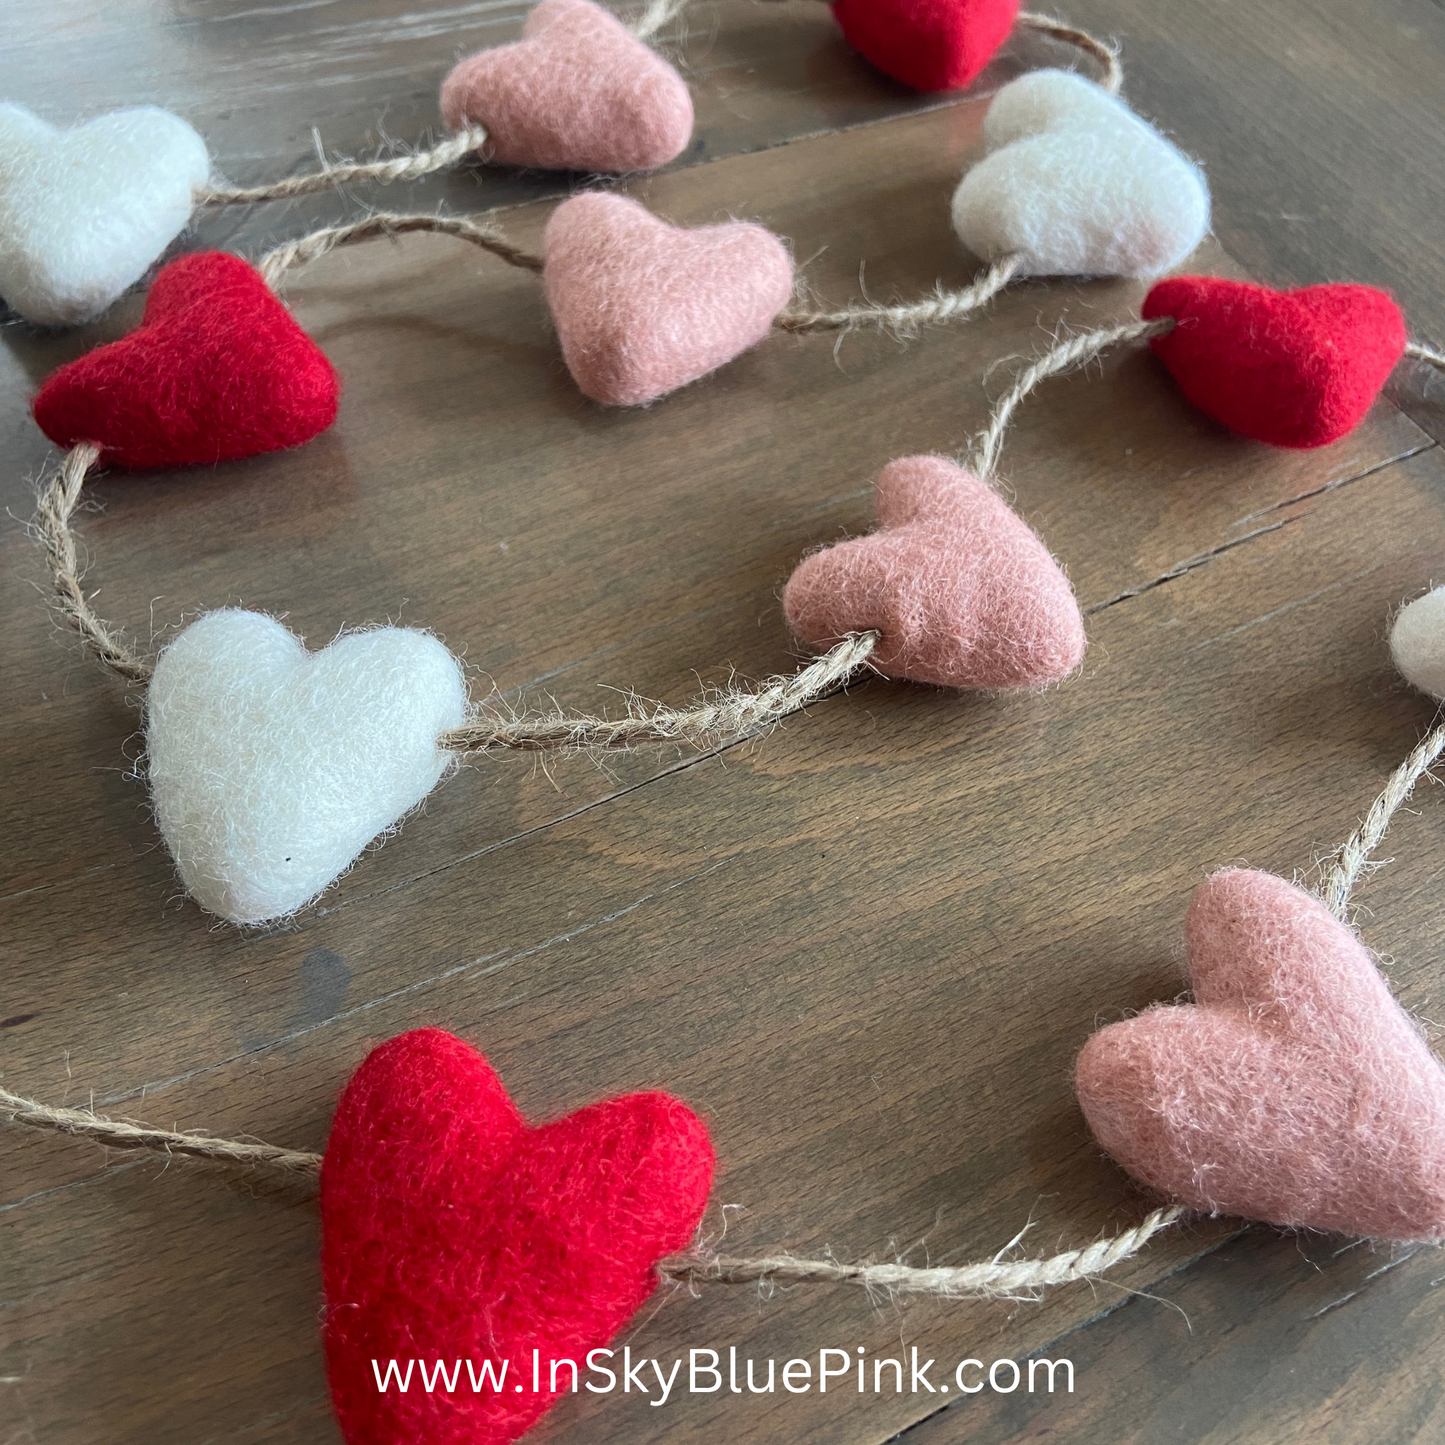 Felted Wool Hearts Garland-Red, Pink, White 4-foot Valentine Decor